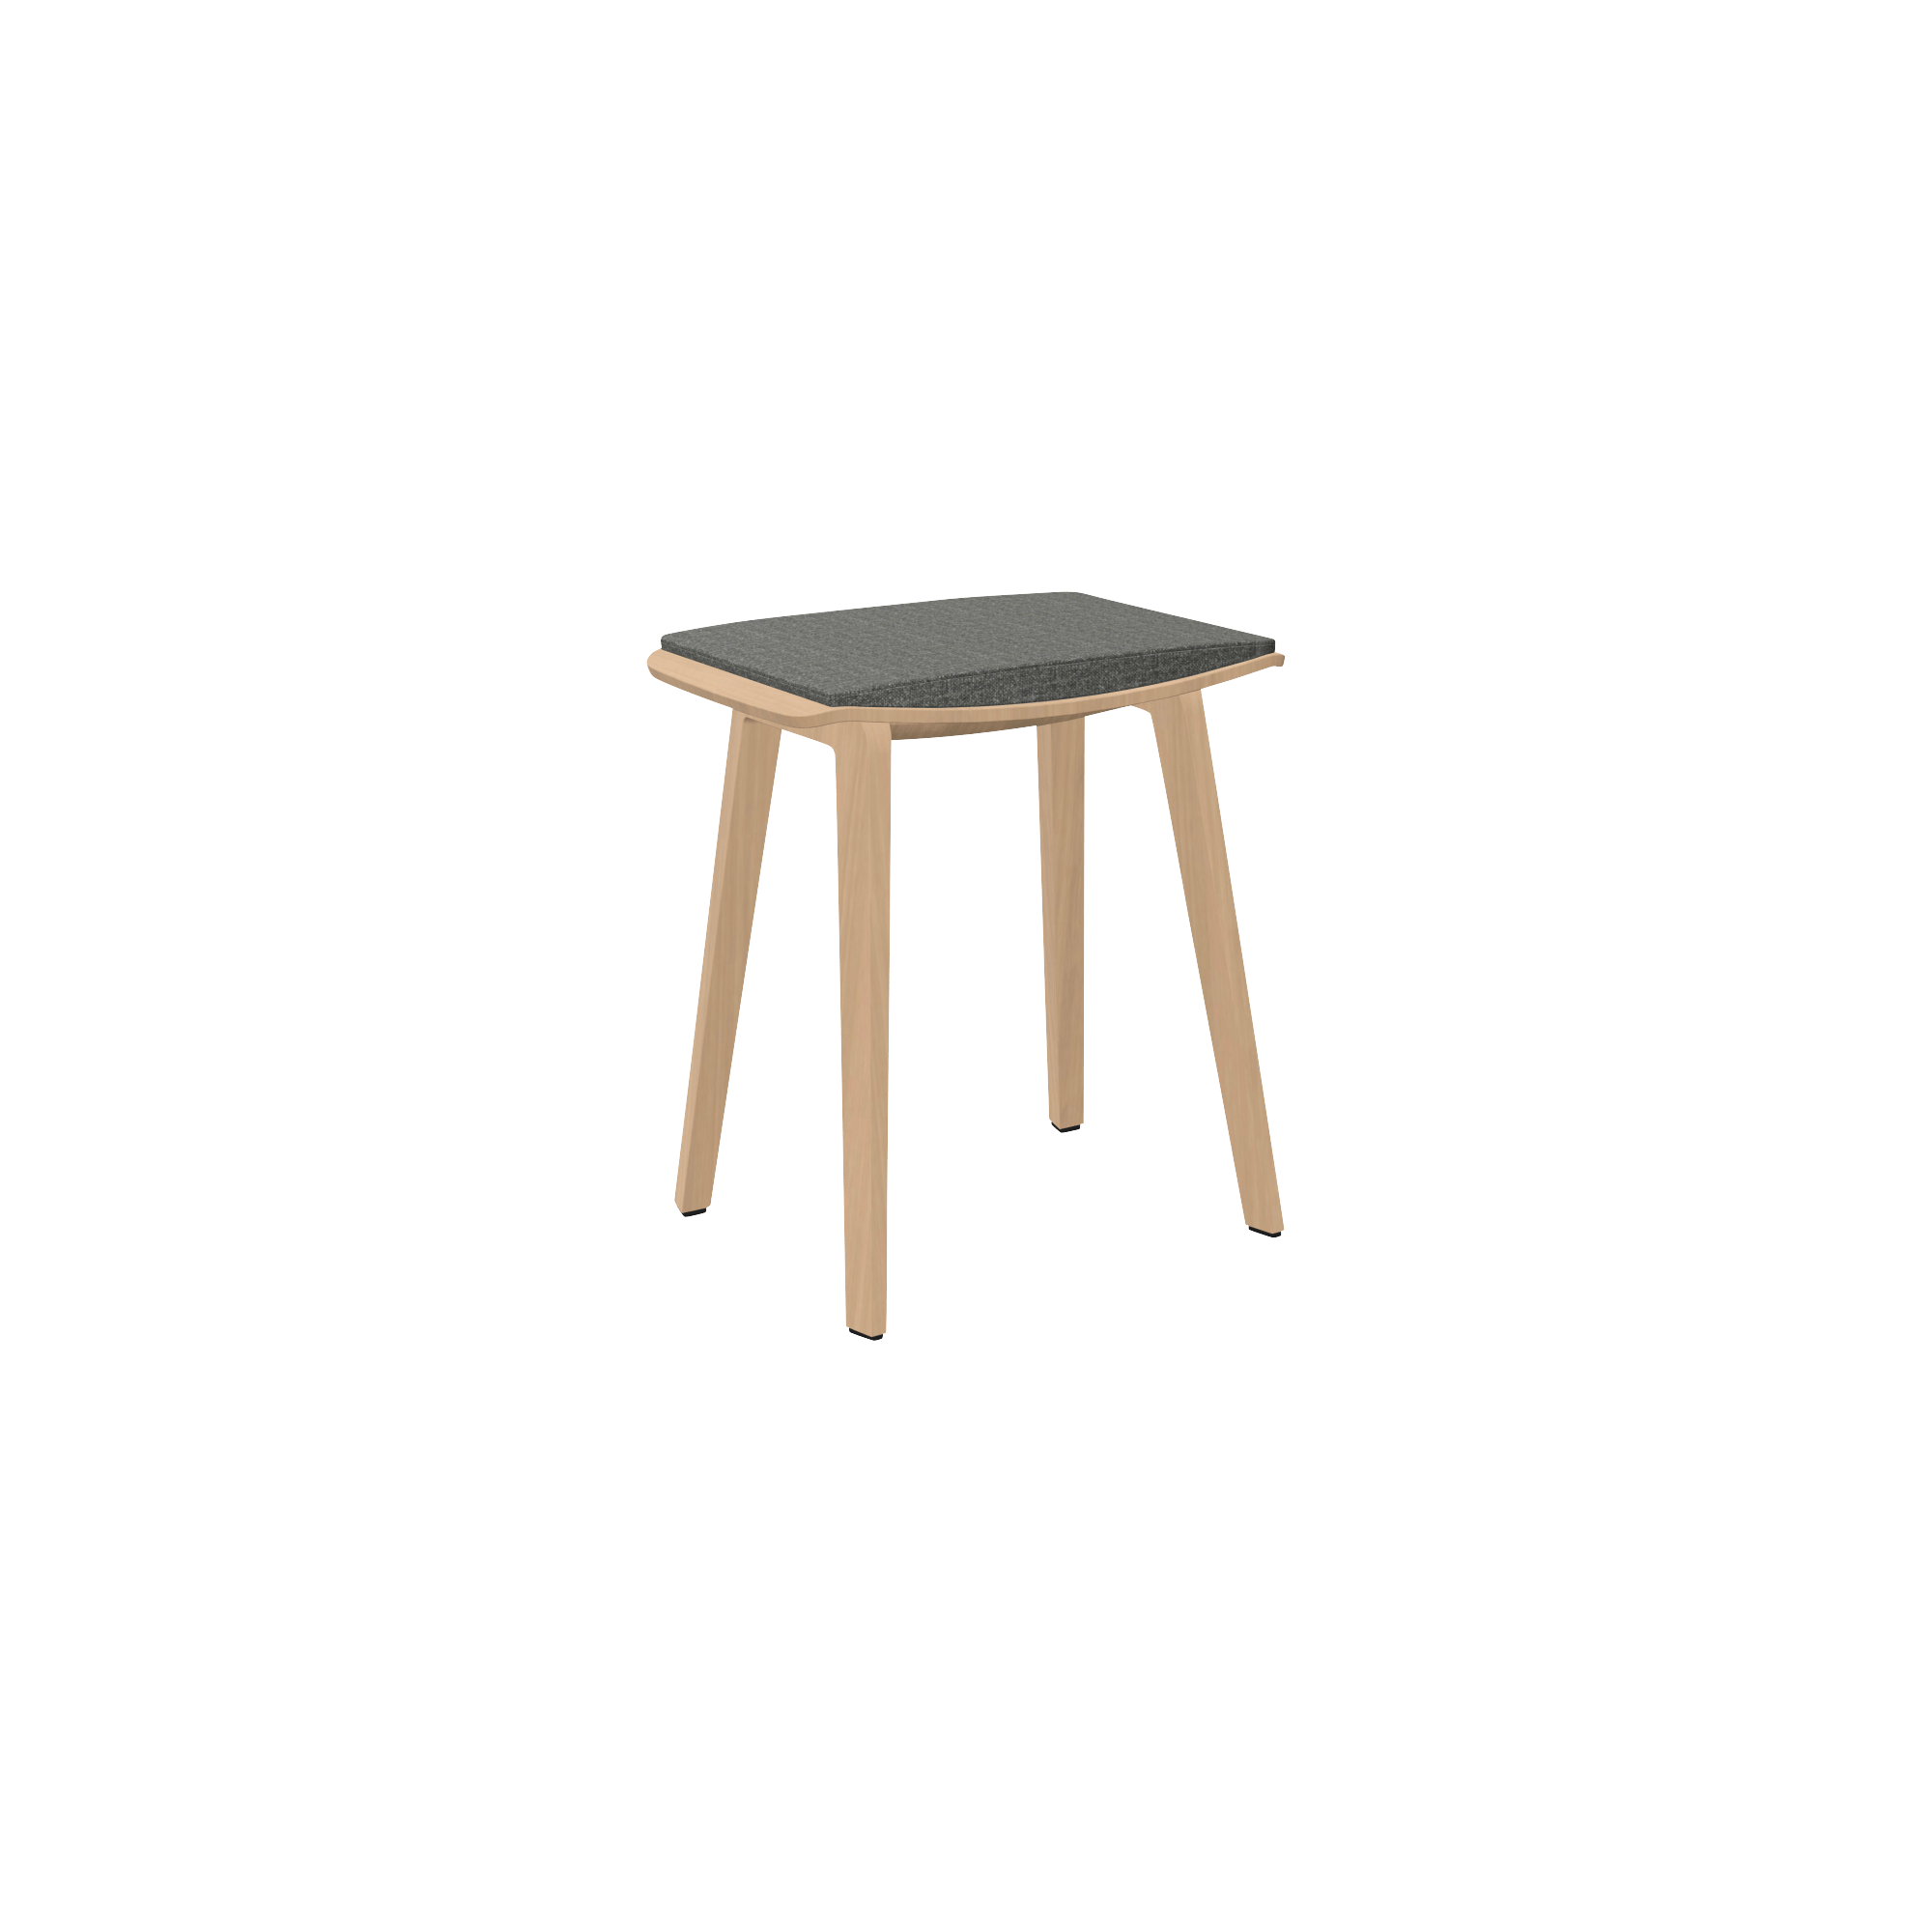 small wooden stool with grey seat